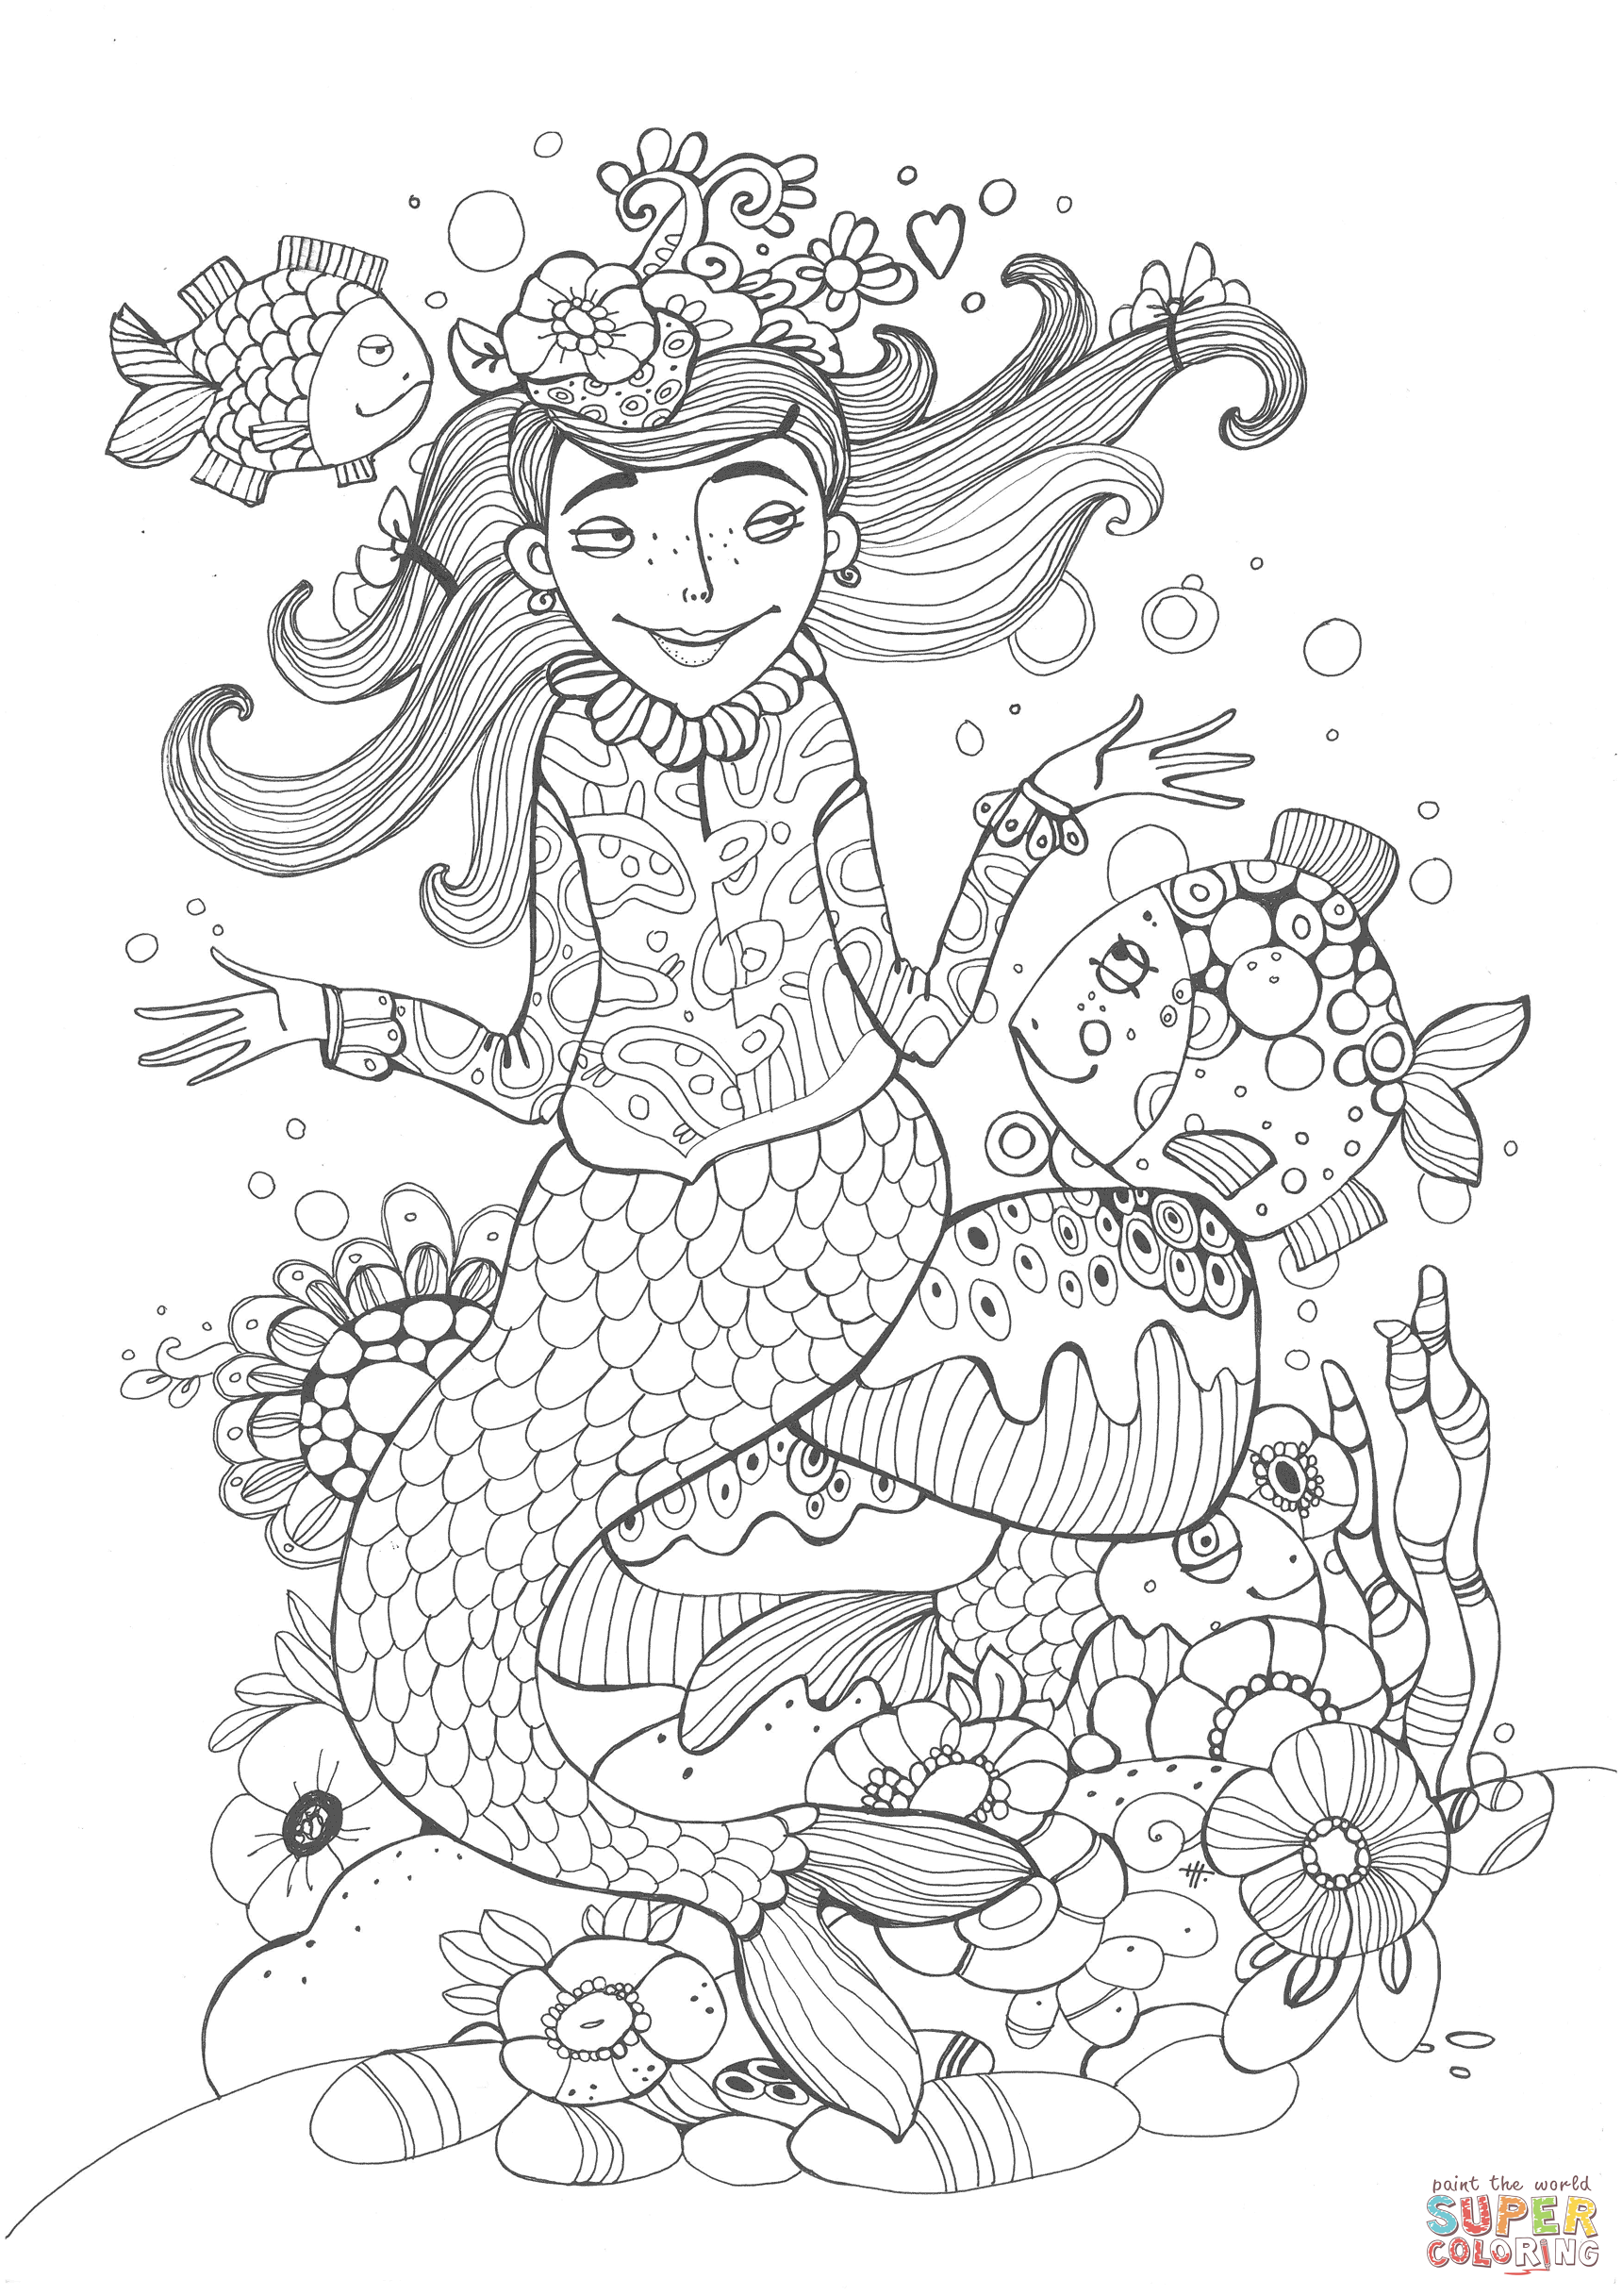 Mermaid is Talking with a Fish Coloring Books - ColoringPagesOnly.com